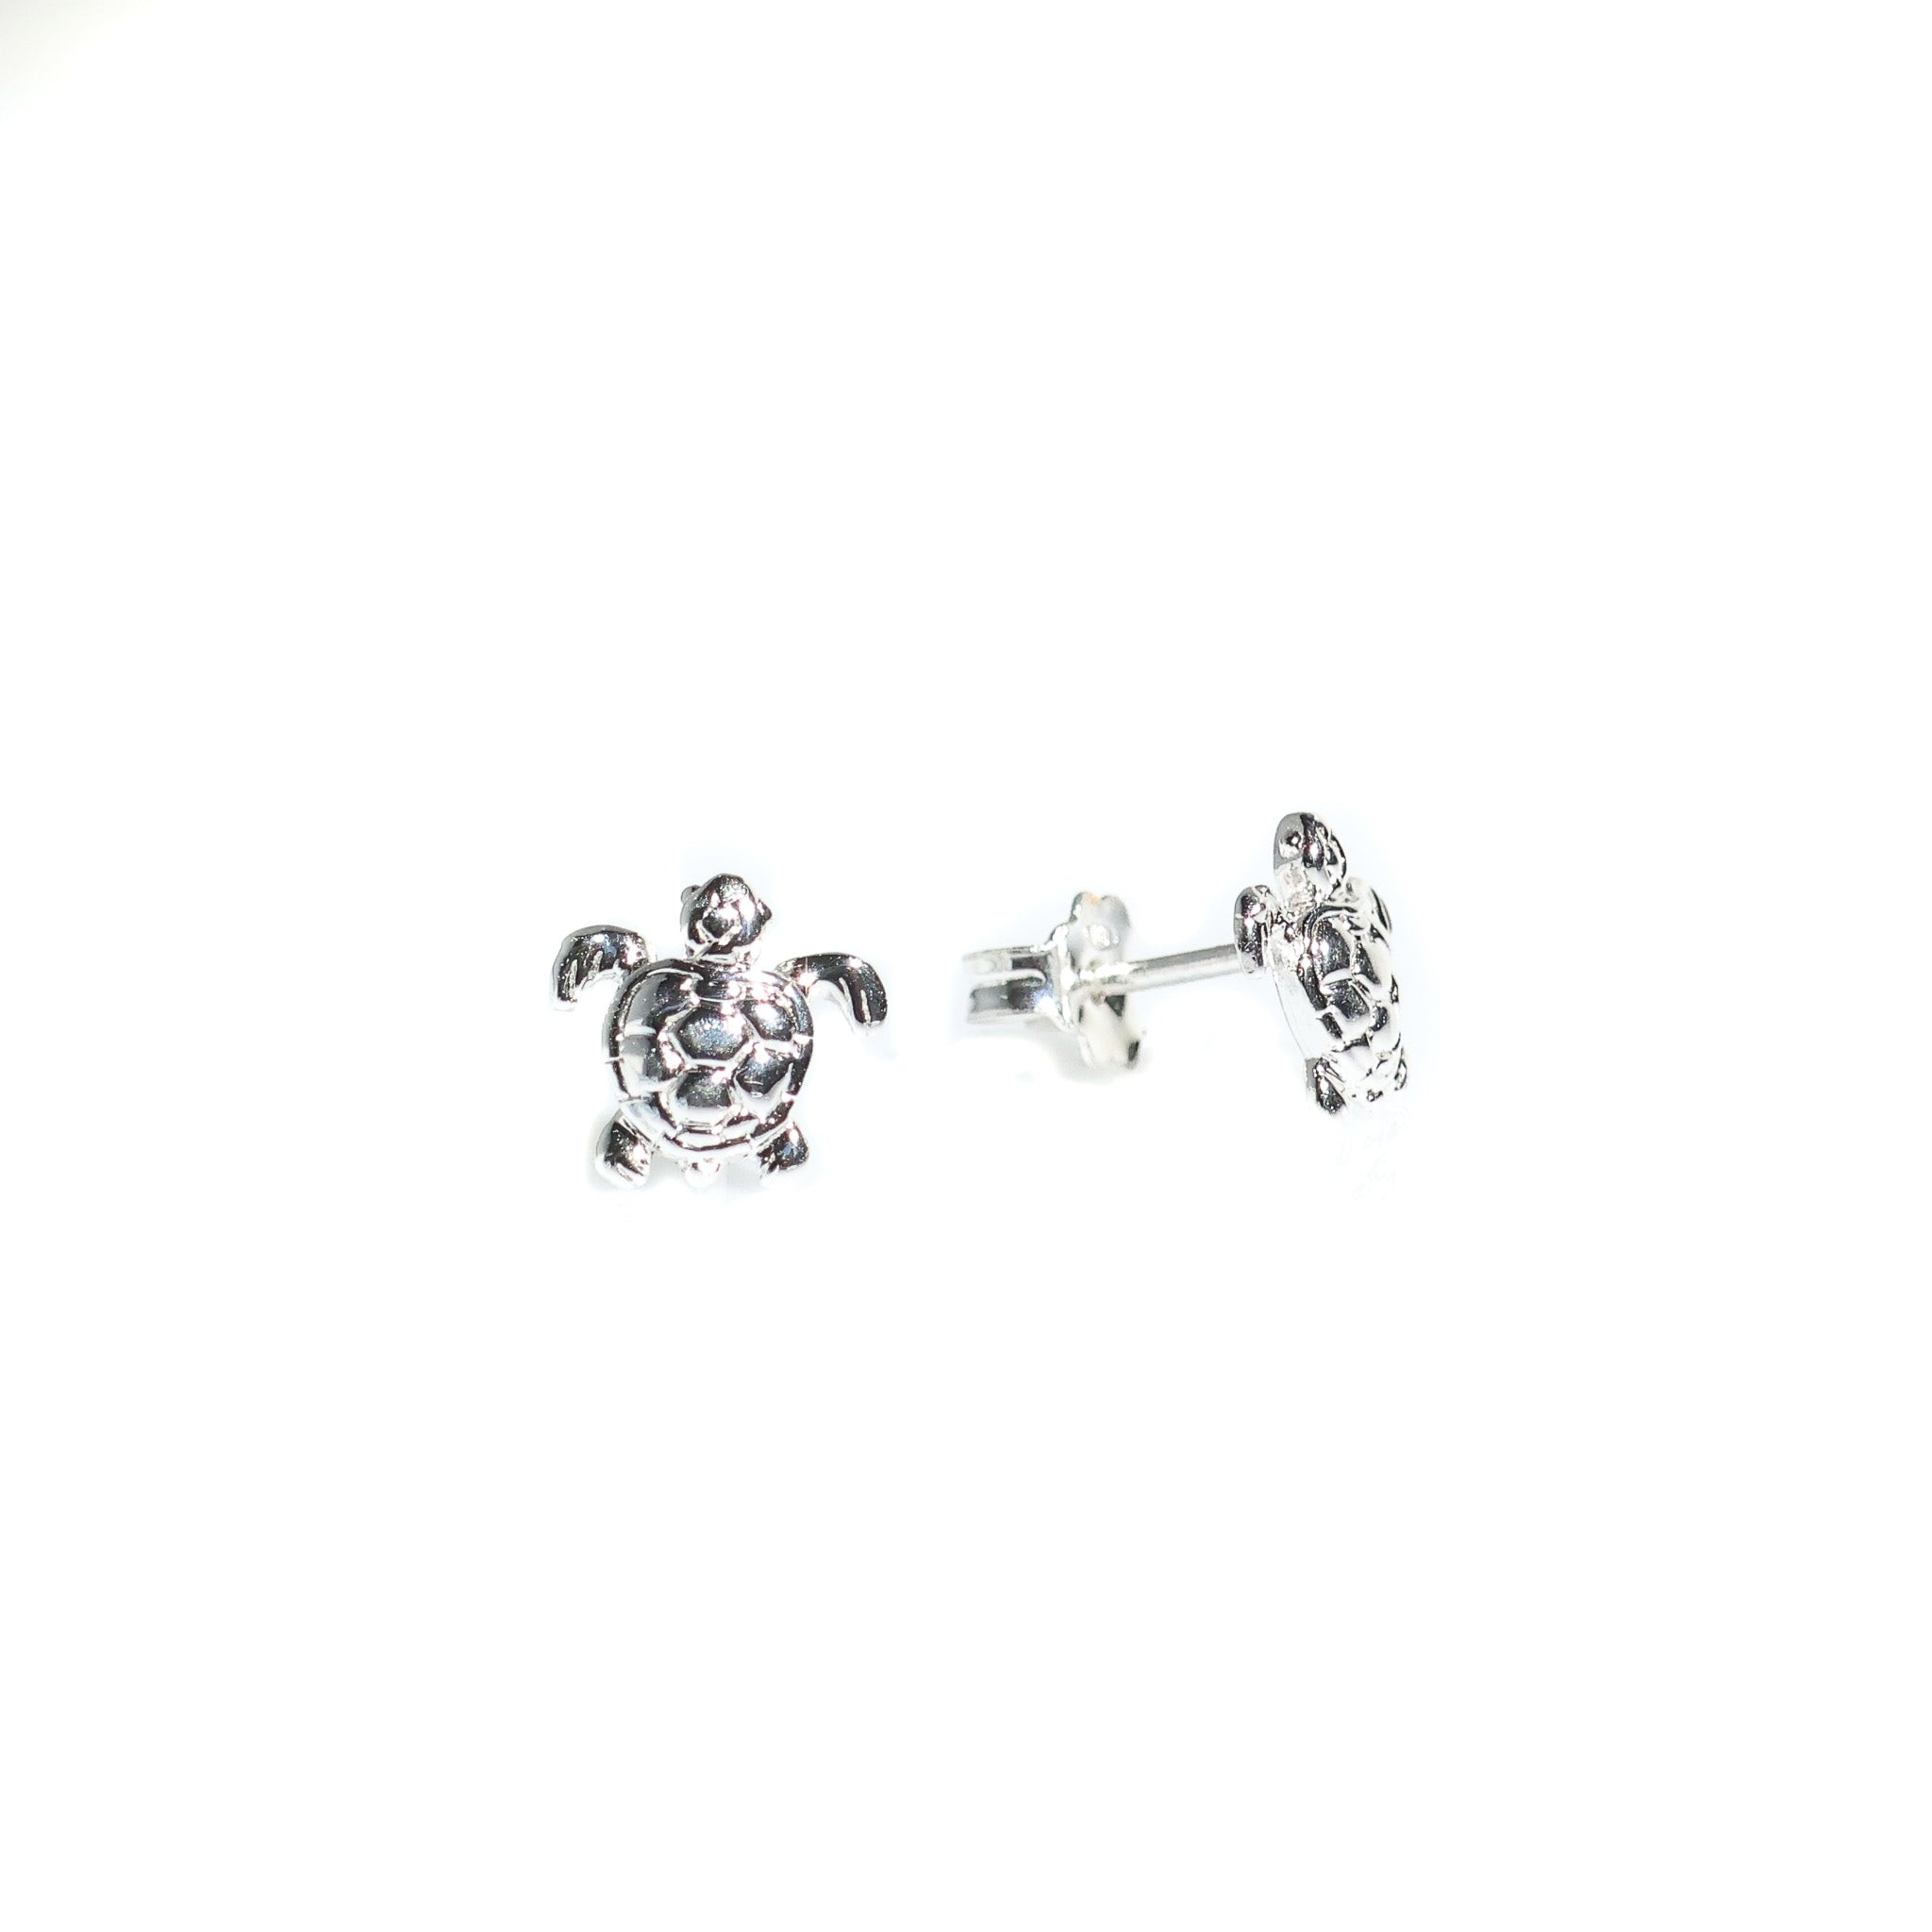 silver turtle studs